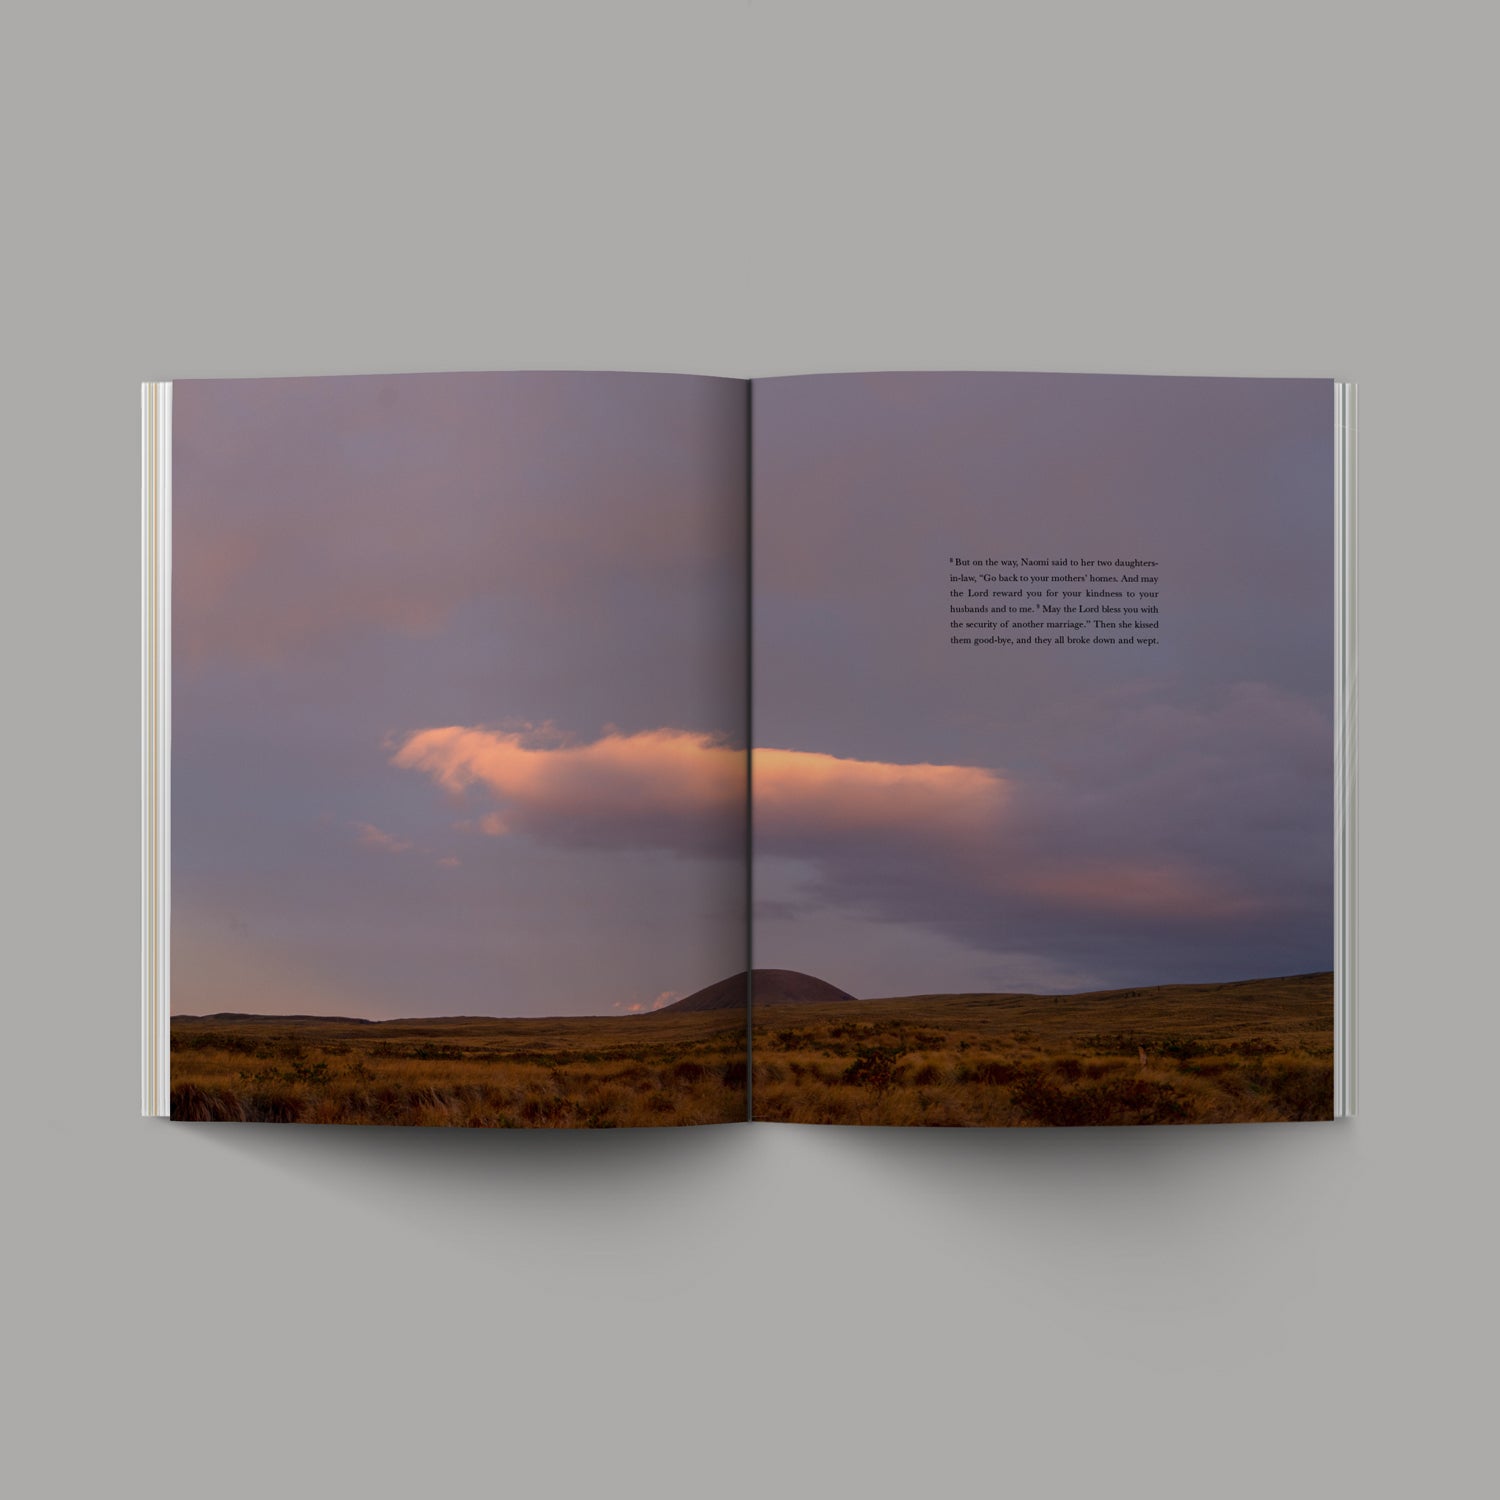 The Book of Ruth open with image of cloud and mountain